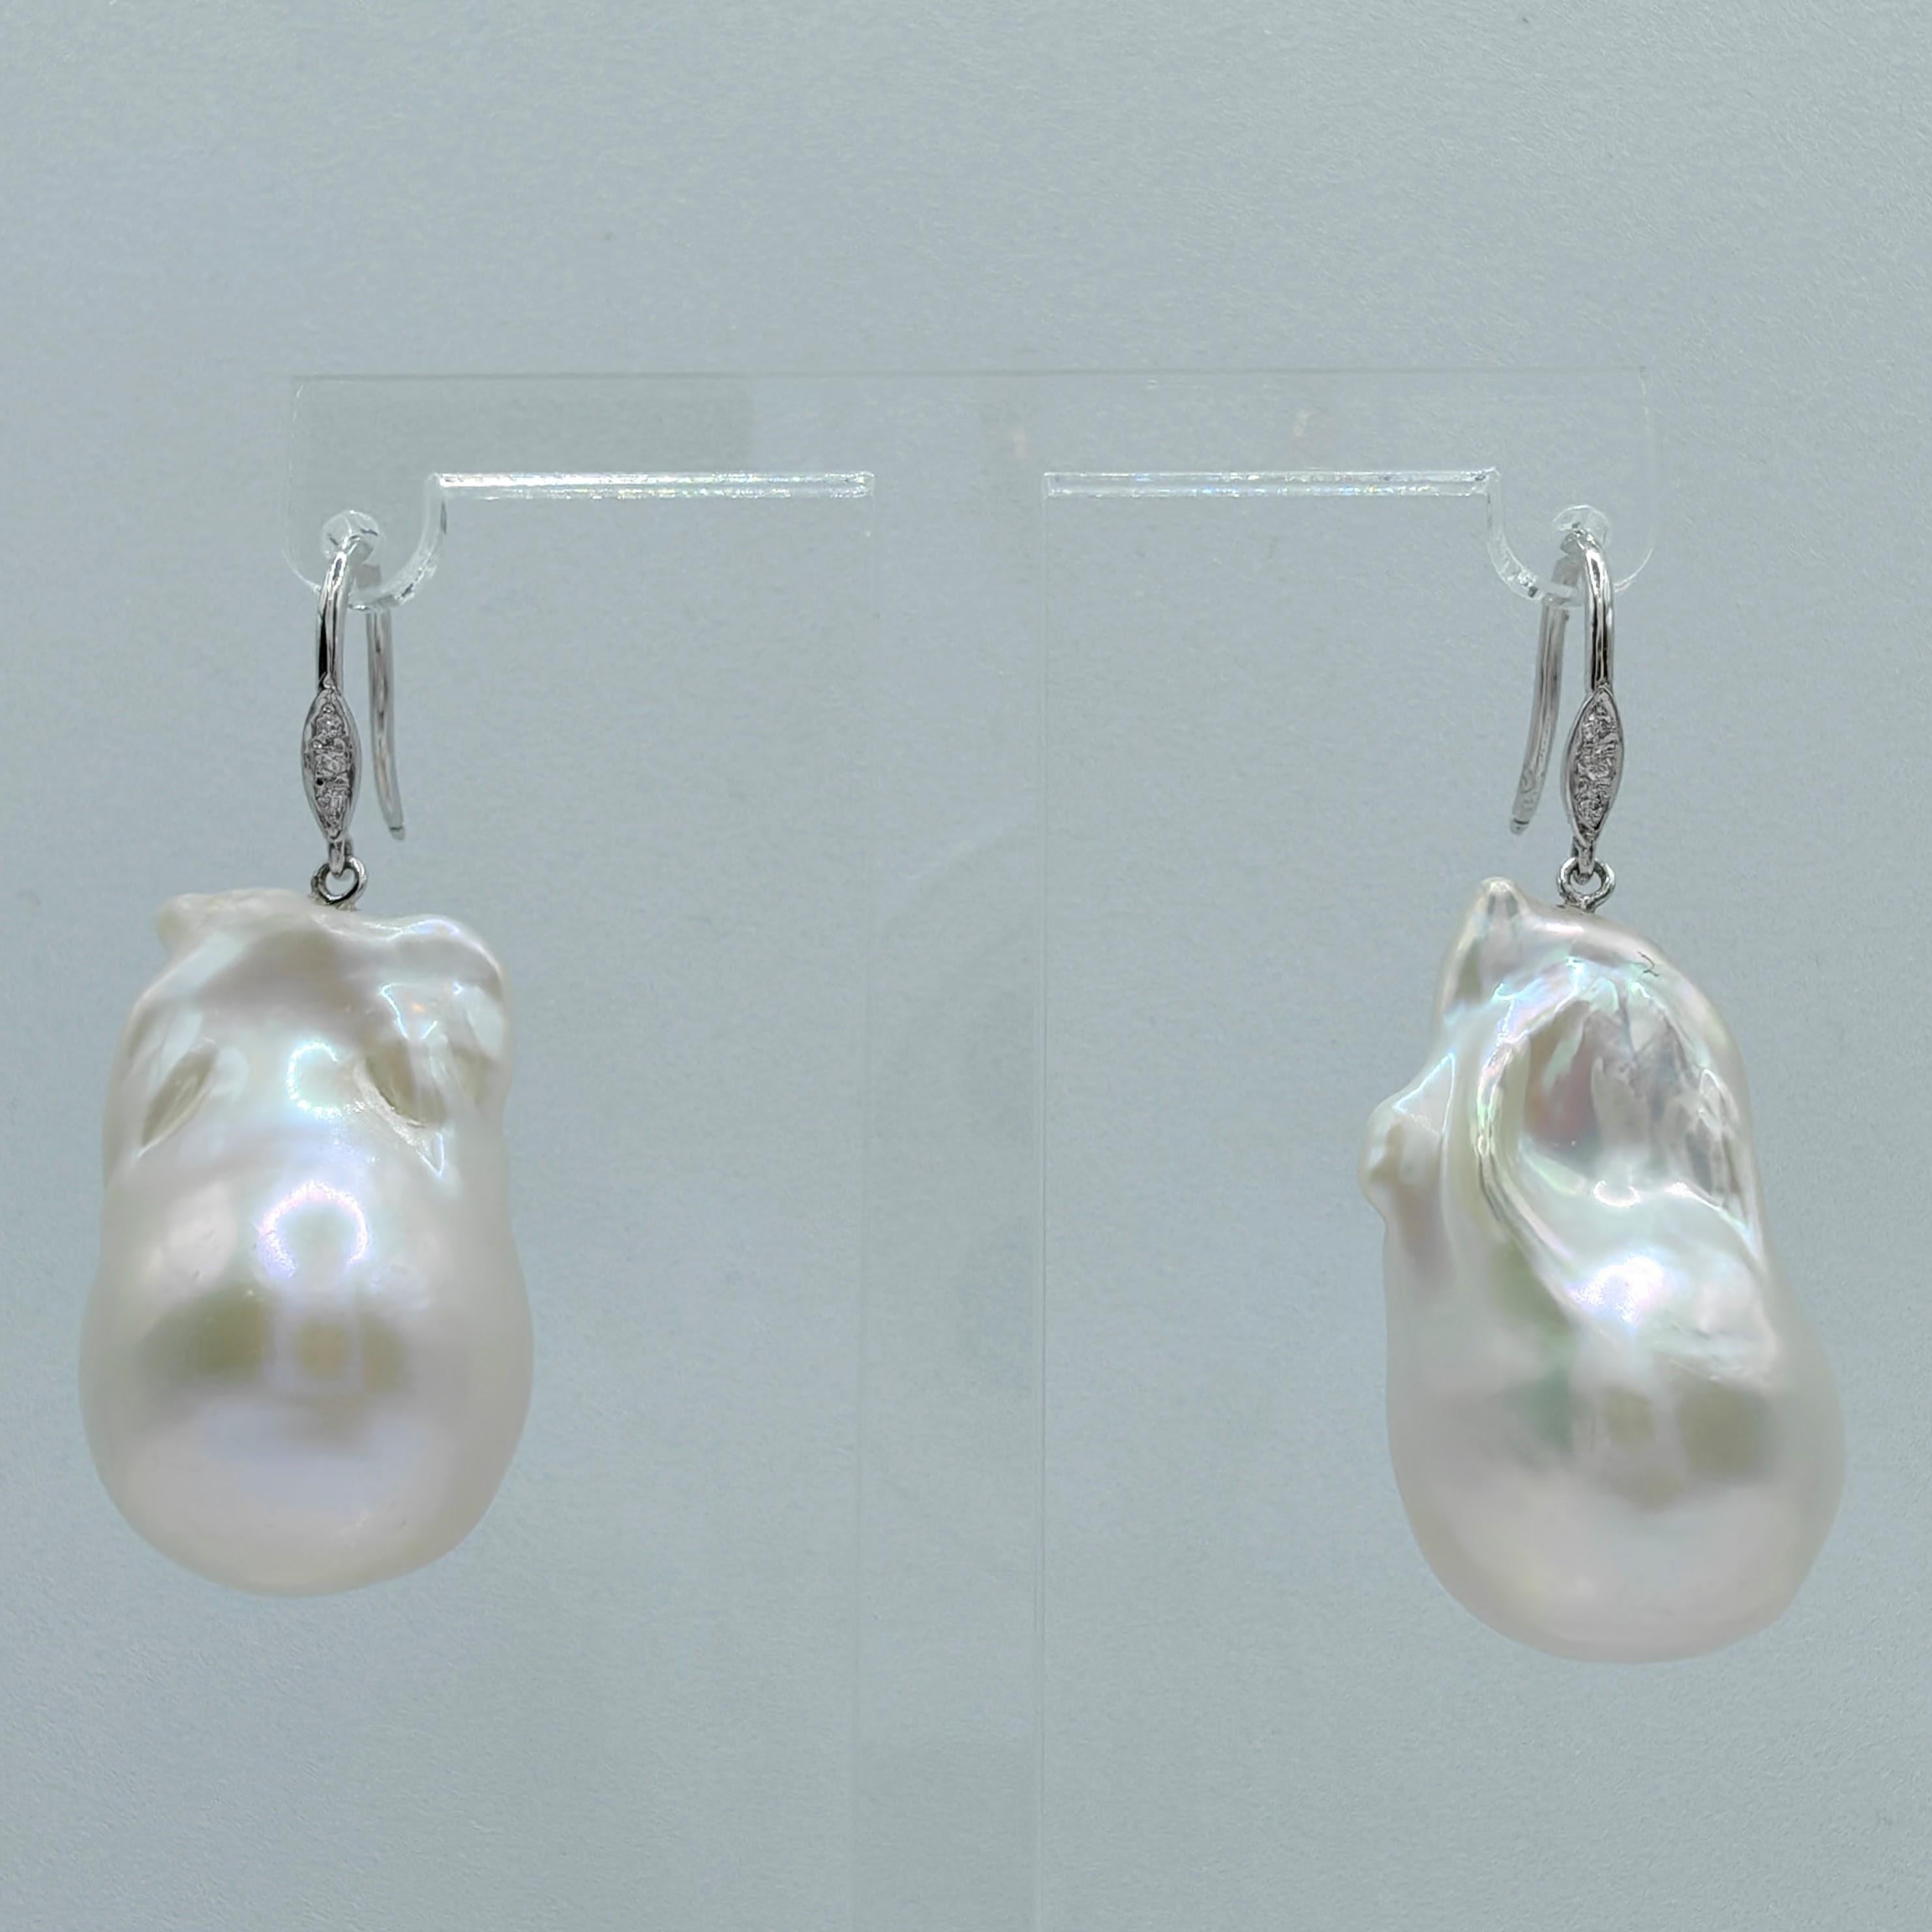 Indulge in the enchanting elegance of our Baroque Pearl Diamond Dangling Drop Earrings with 18K White Gold French Hooks. Featuring two captivating Freshwater Cultured Baroque Pearls, weighing 35.03 and 31.14 carats respectively, these earrings exude